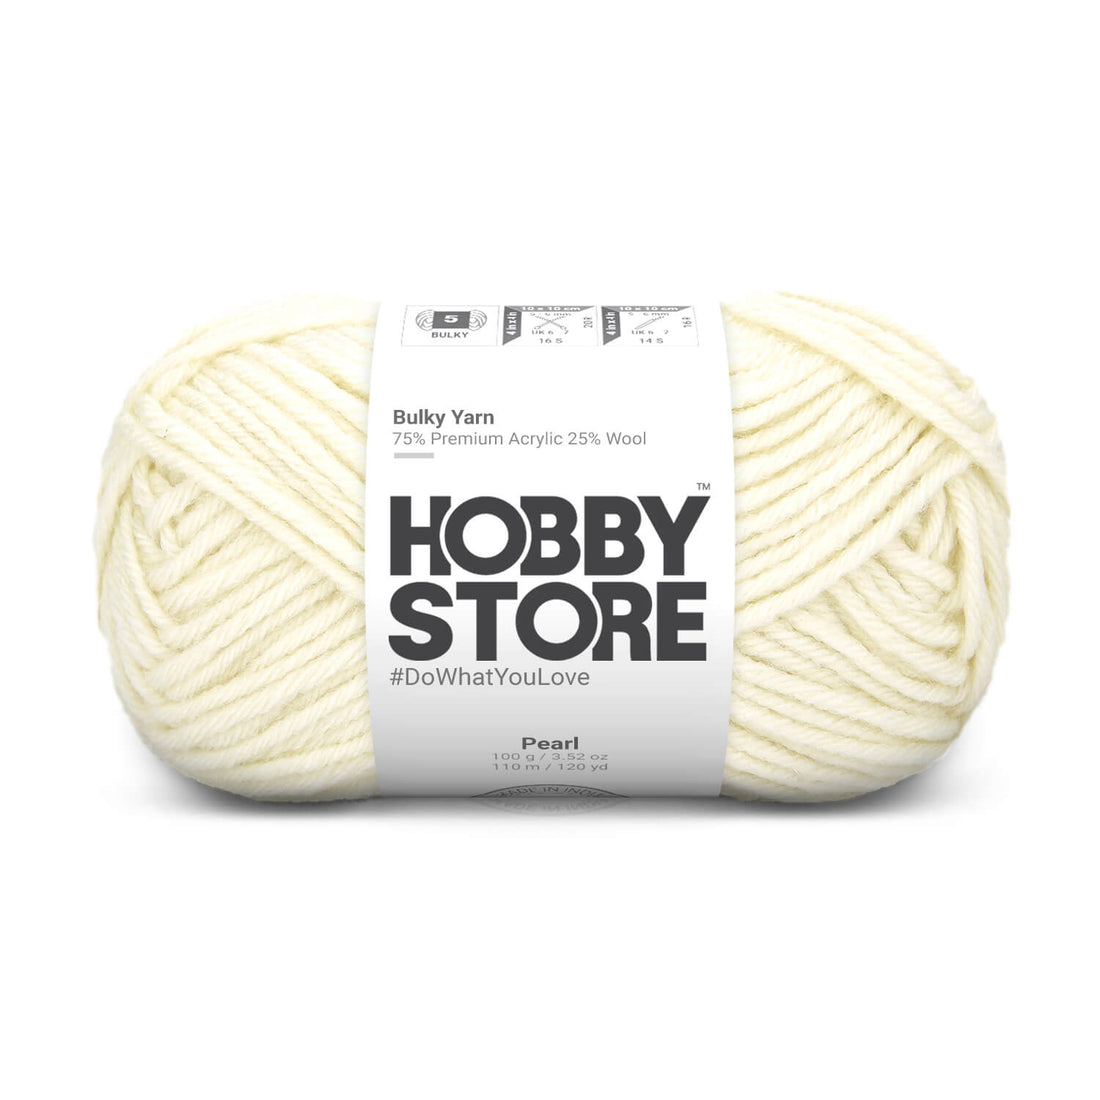 Bulky Yarn by Hobby Store - Pearl 6036